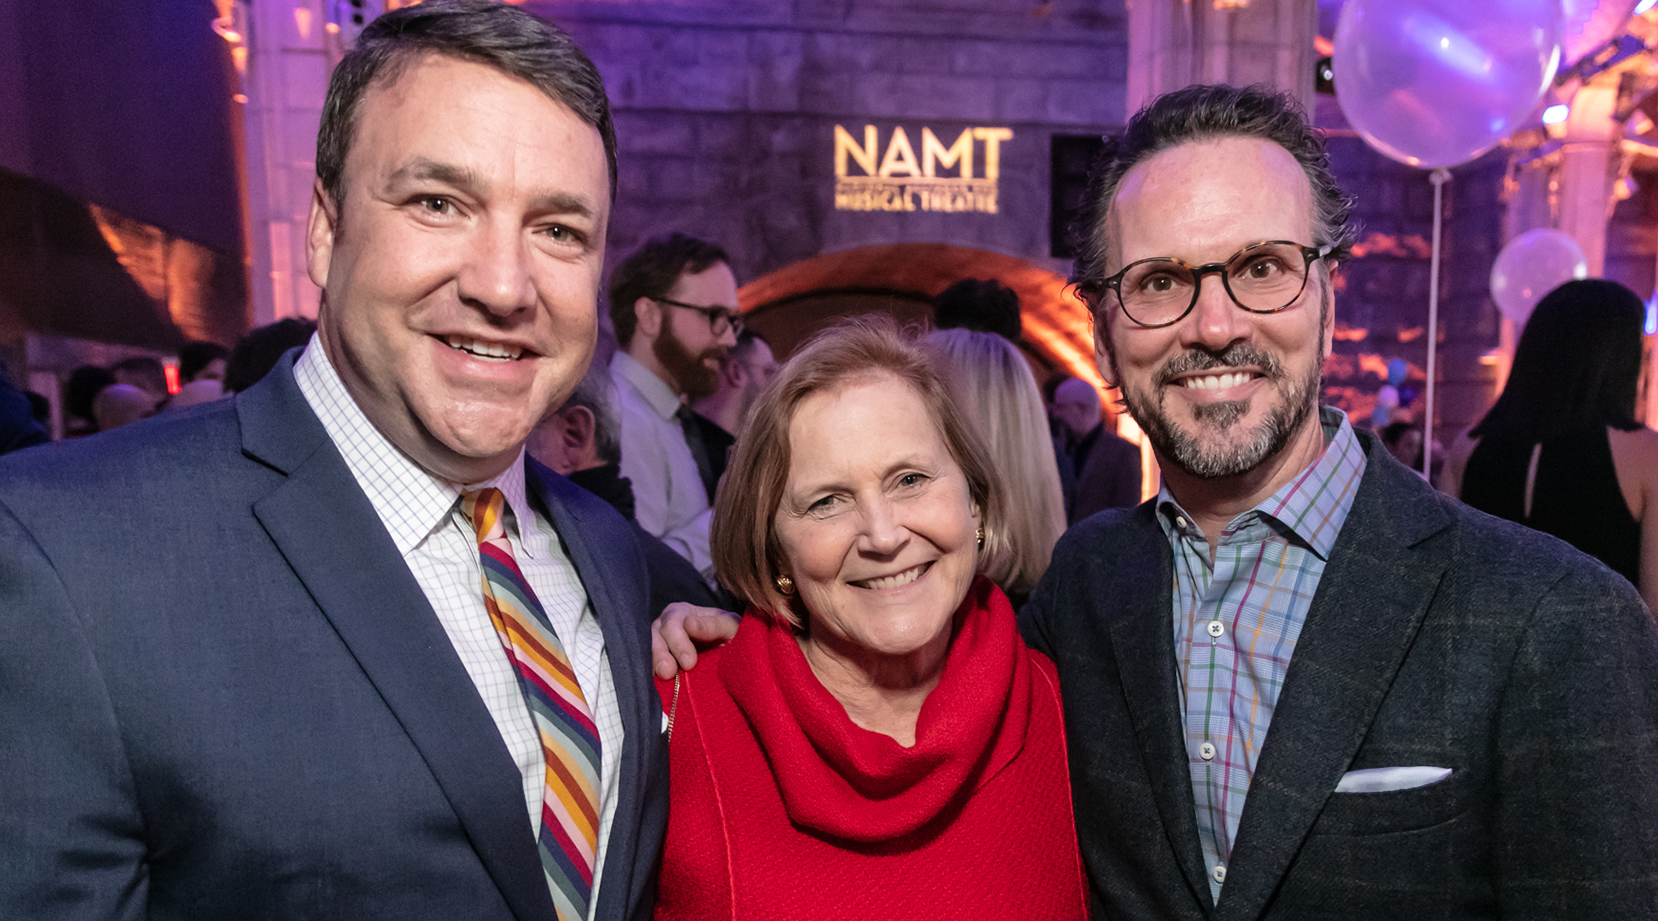 Past NAMT Presidents Jeff Loeb (The Hollywood Pantages) and Rick Boynton (Chicago Shakespeare Theater) with former NAMT Executive Director Kathy Evans (Rhinebeck Writers Retreat)